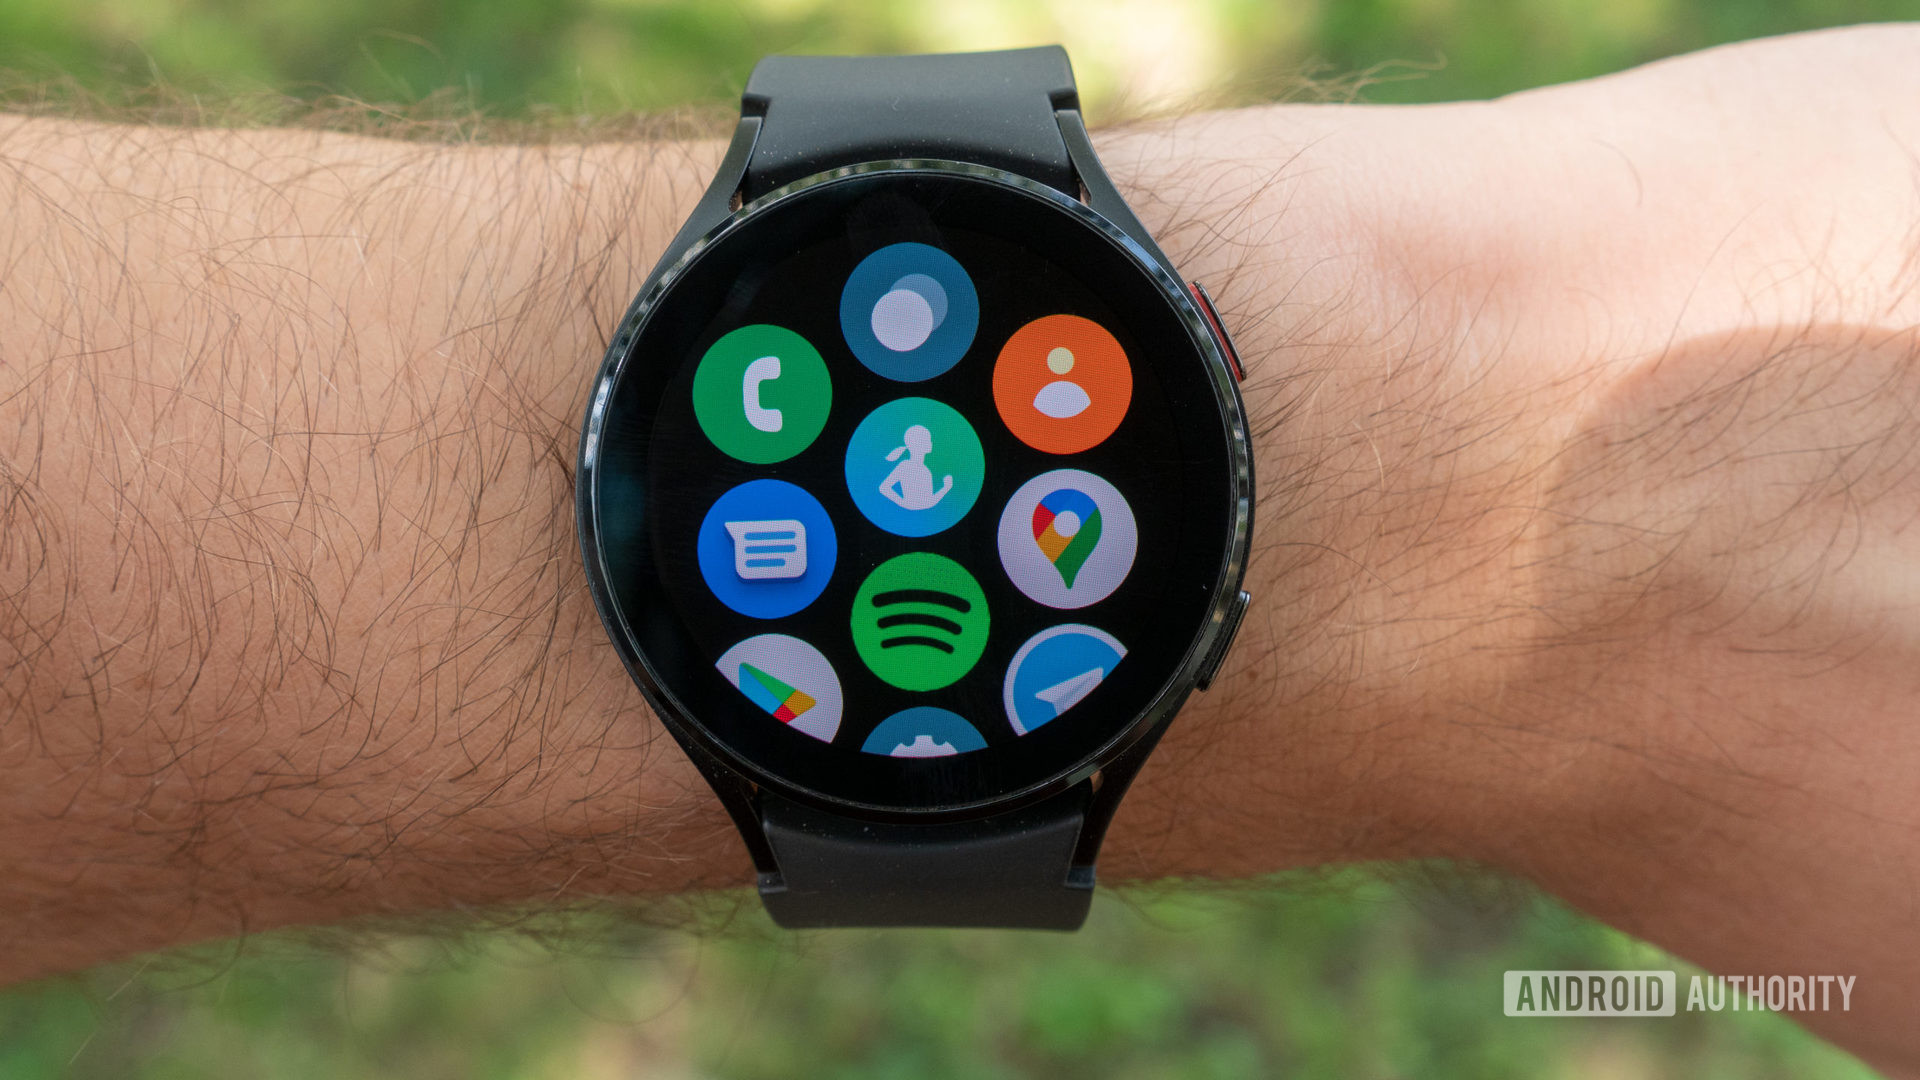 The Samsung Galaxy Watch 4 on a man's wrist showing the all-apps page.